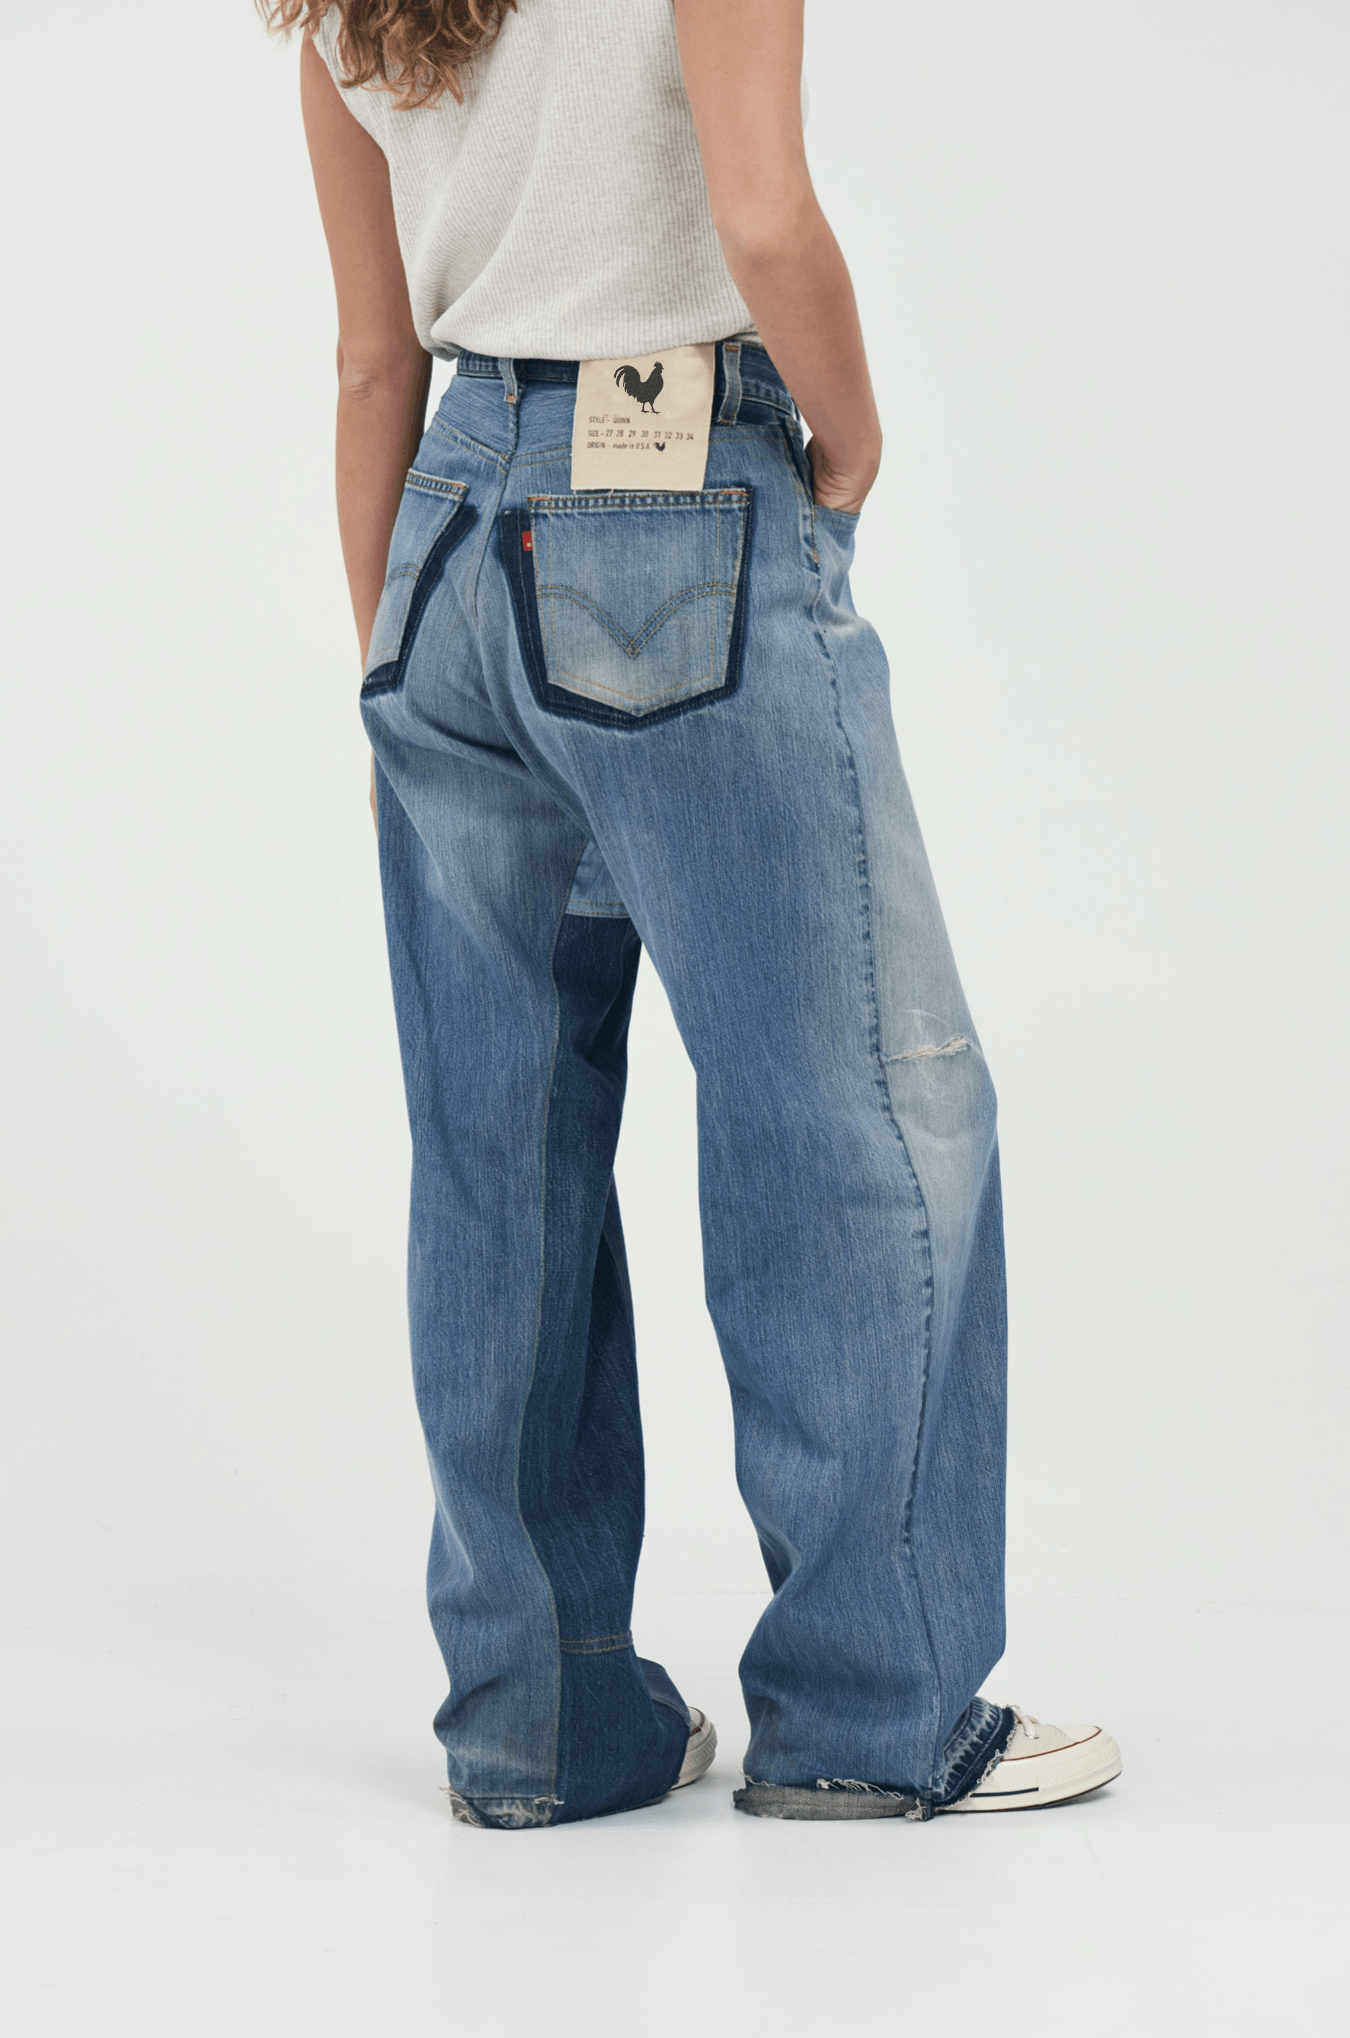 You The Brave - Wide Leg Denim Pant - Reviving forgotten textiles into timeless masterpieces. Our ethical practices and up-cycling philosophy drive positive change. Based in LA, we excel in designing, sourcing, and manufacturing domestic goods, crafting luxury utilitarian collections. Express your style sustainably with authentic, American-made fashion and support our commitment to locally-produced goods.